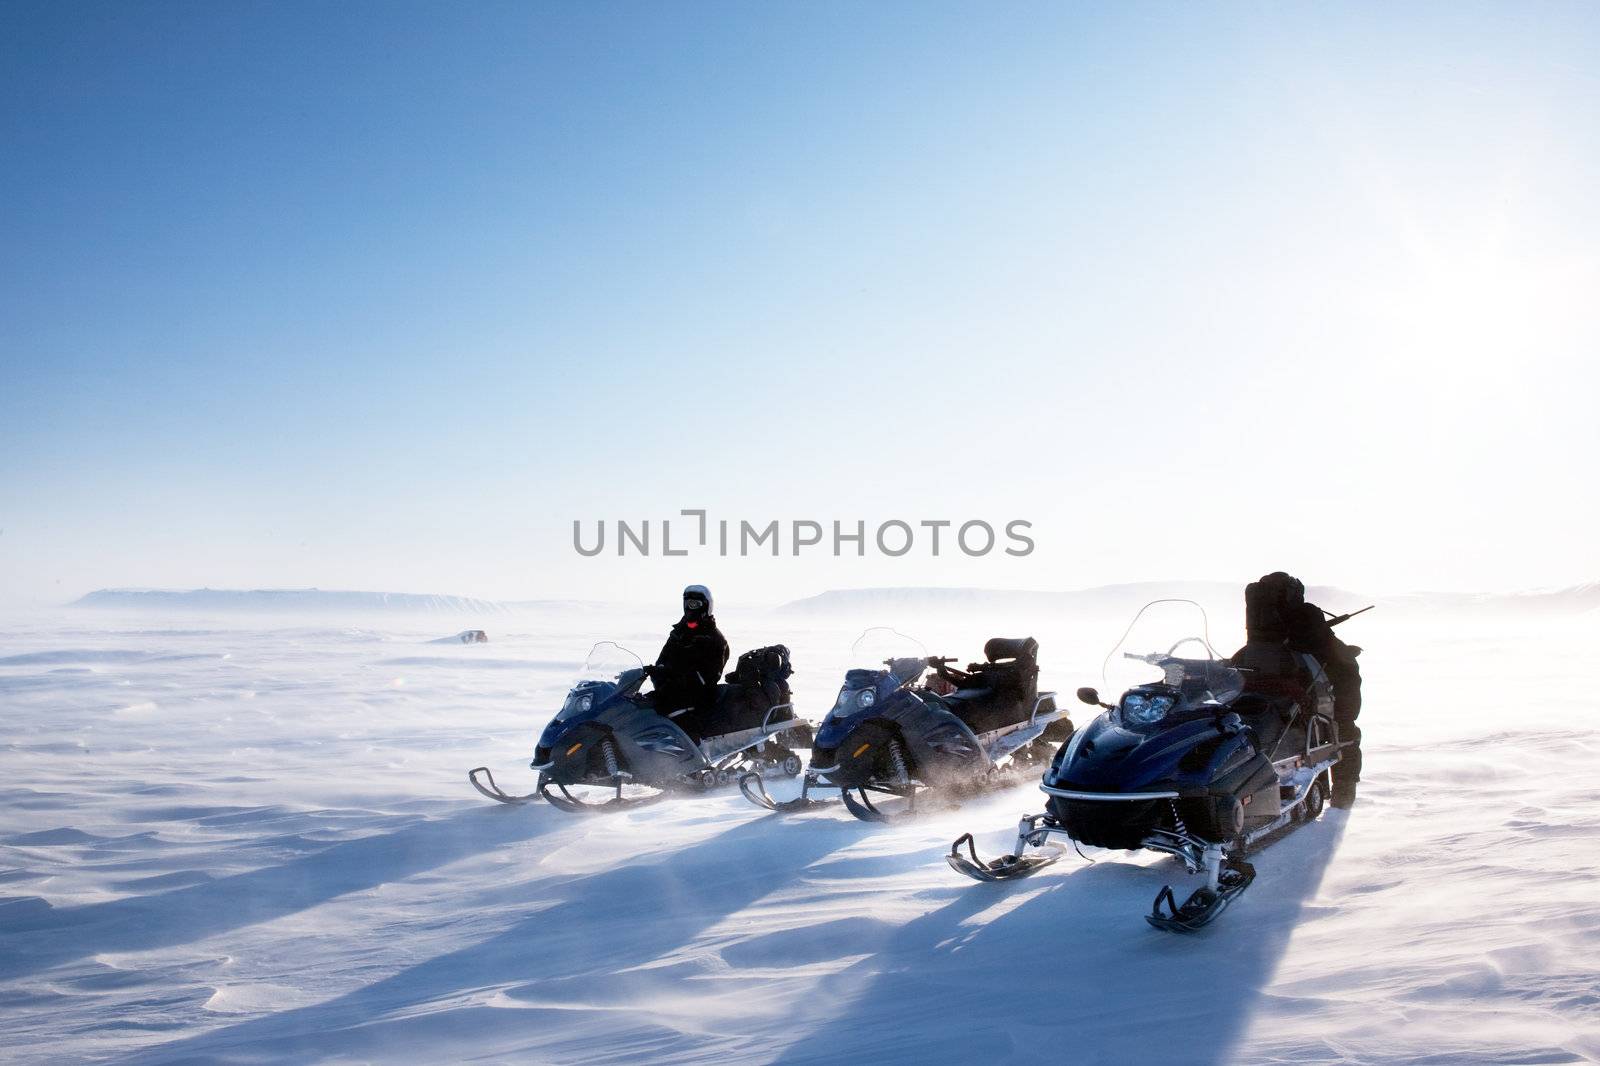 A winter landscape with blowing snow and three snowmobiles.